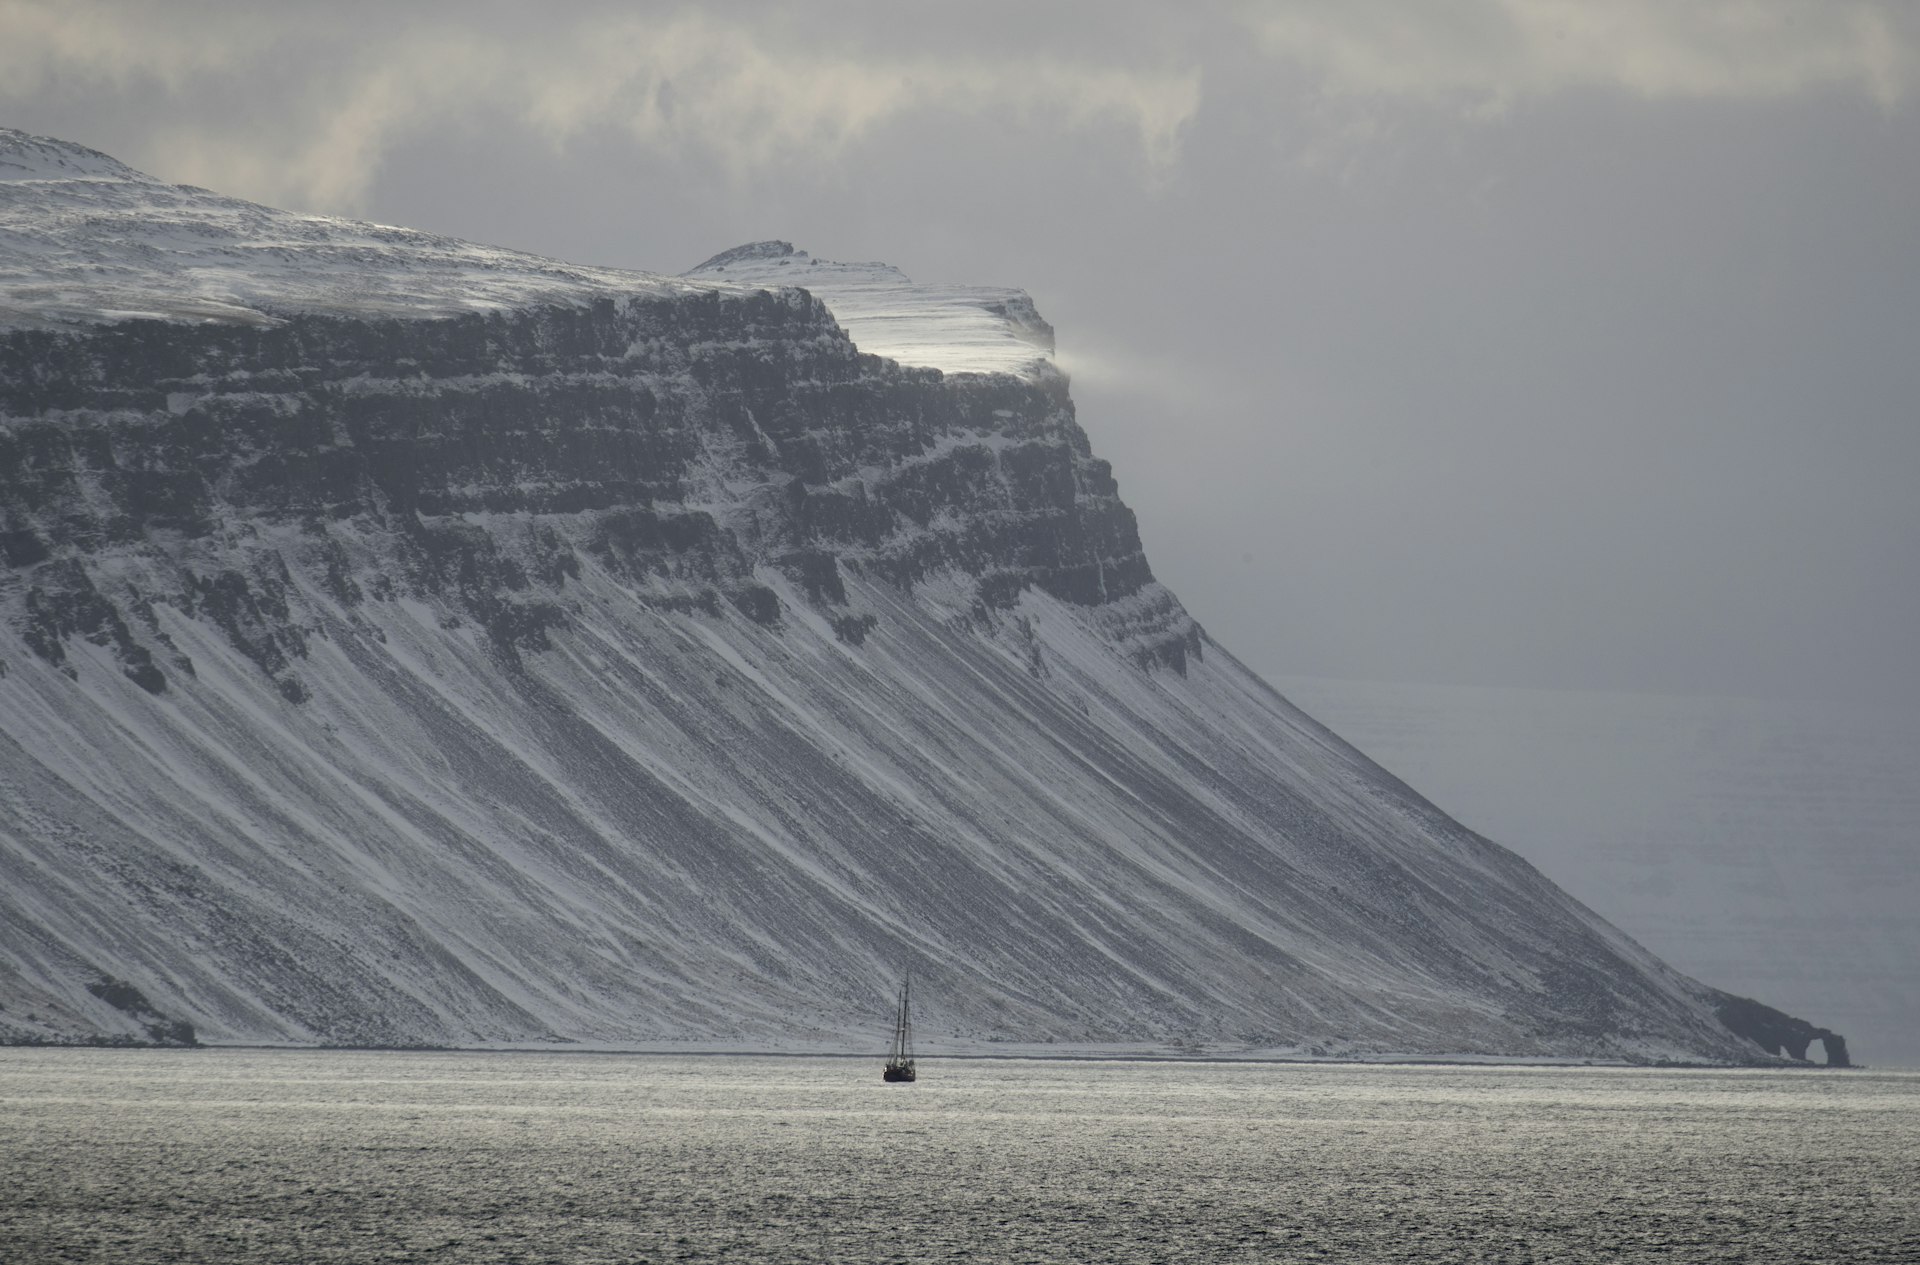 A mountain with a sailing boat out on the water in front of it at Hornstrandir Nature Reserve, Westfjords, Iceland